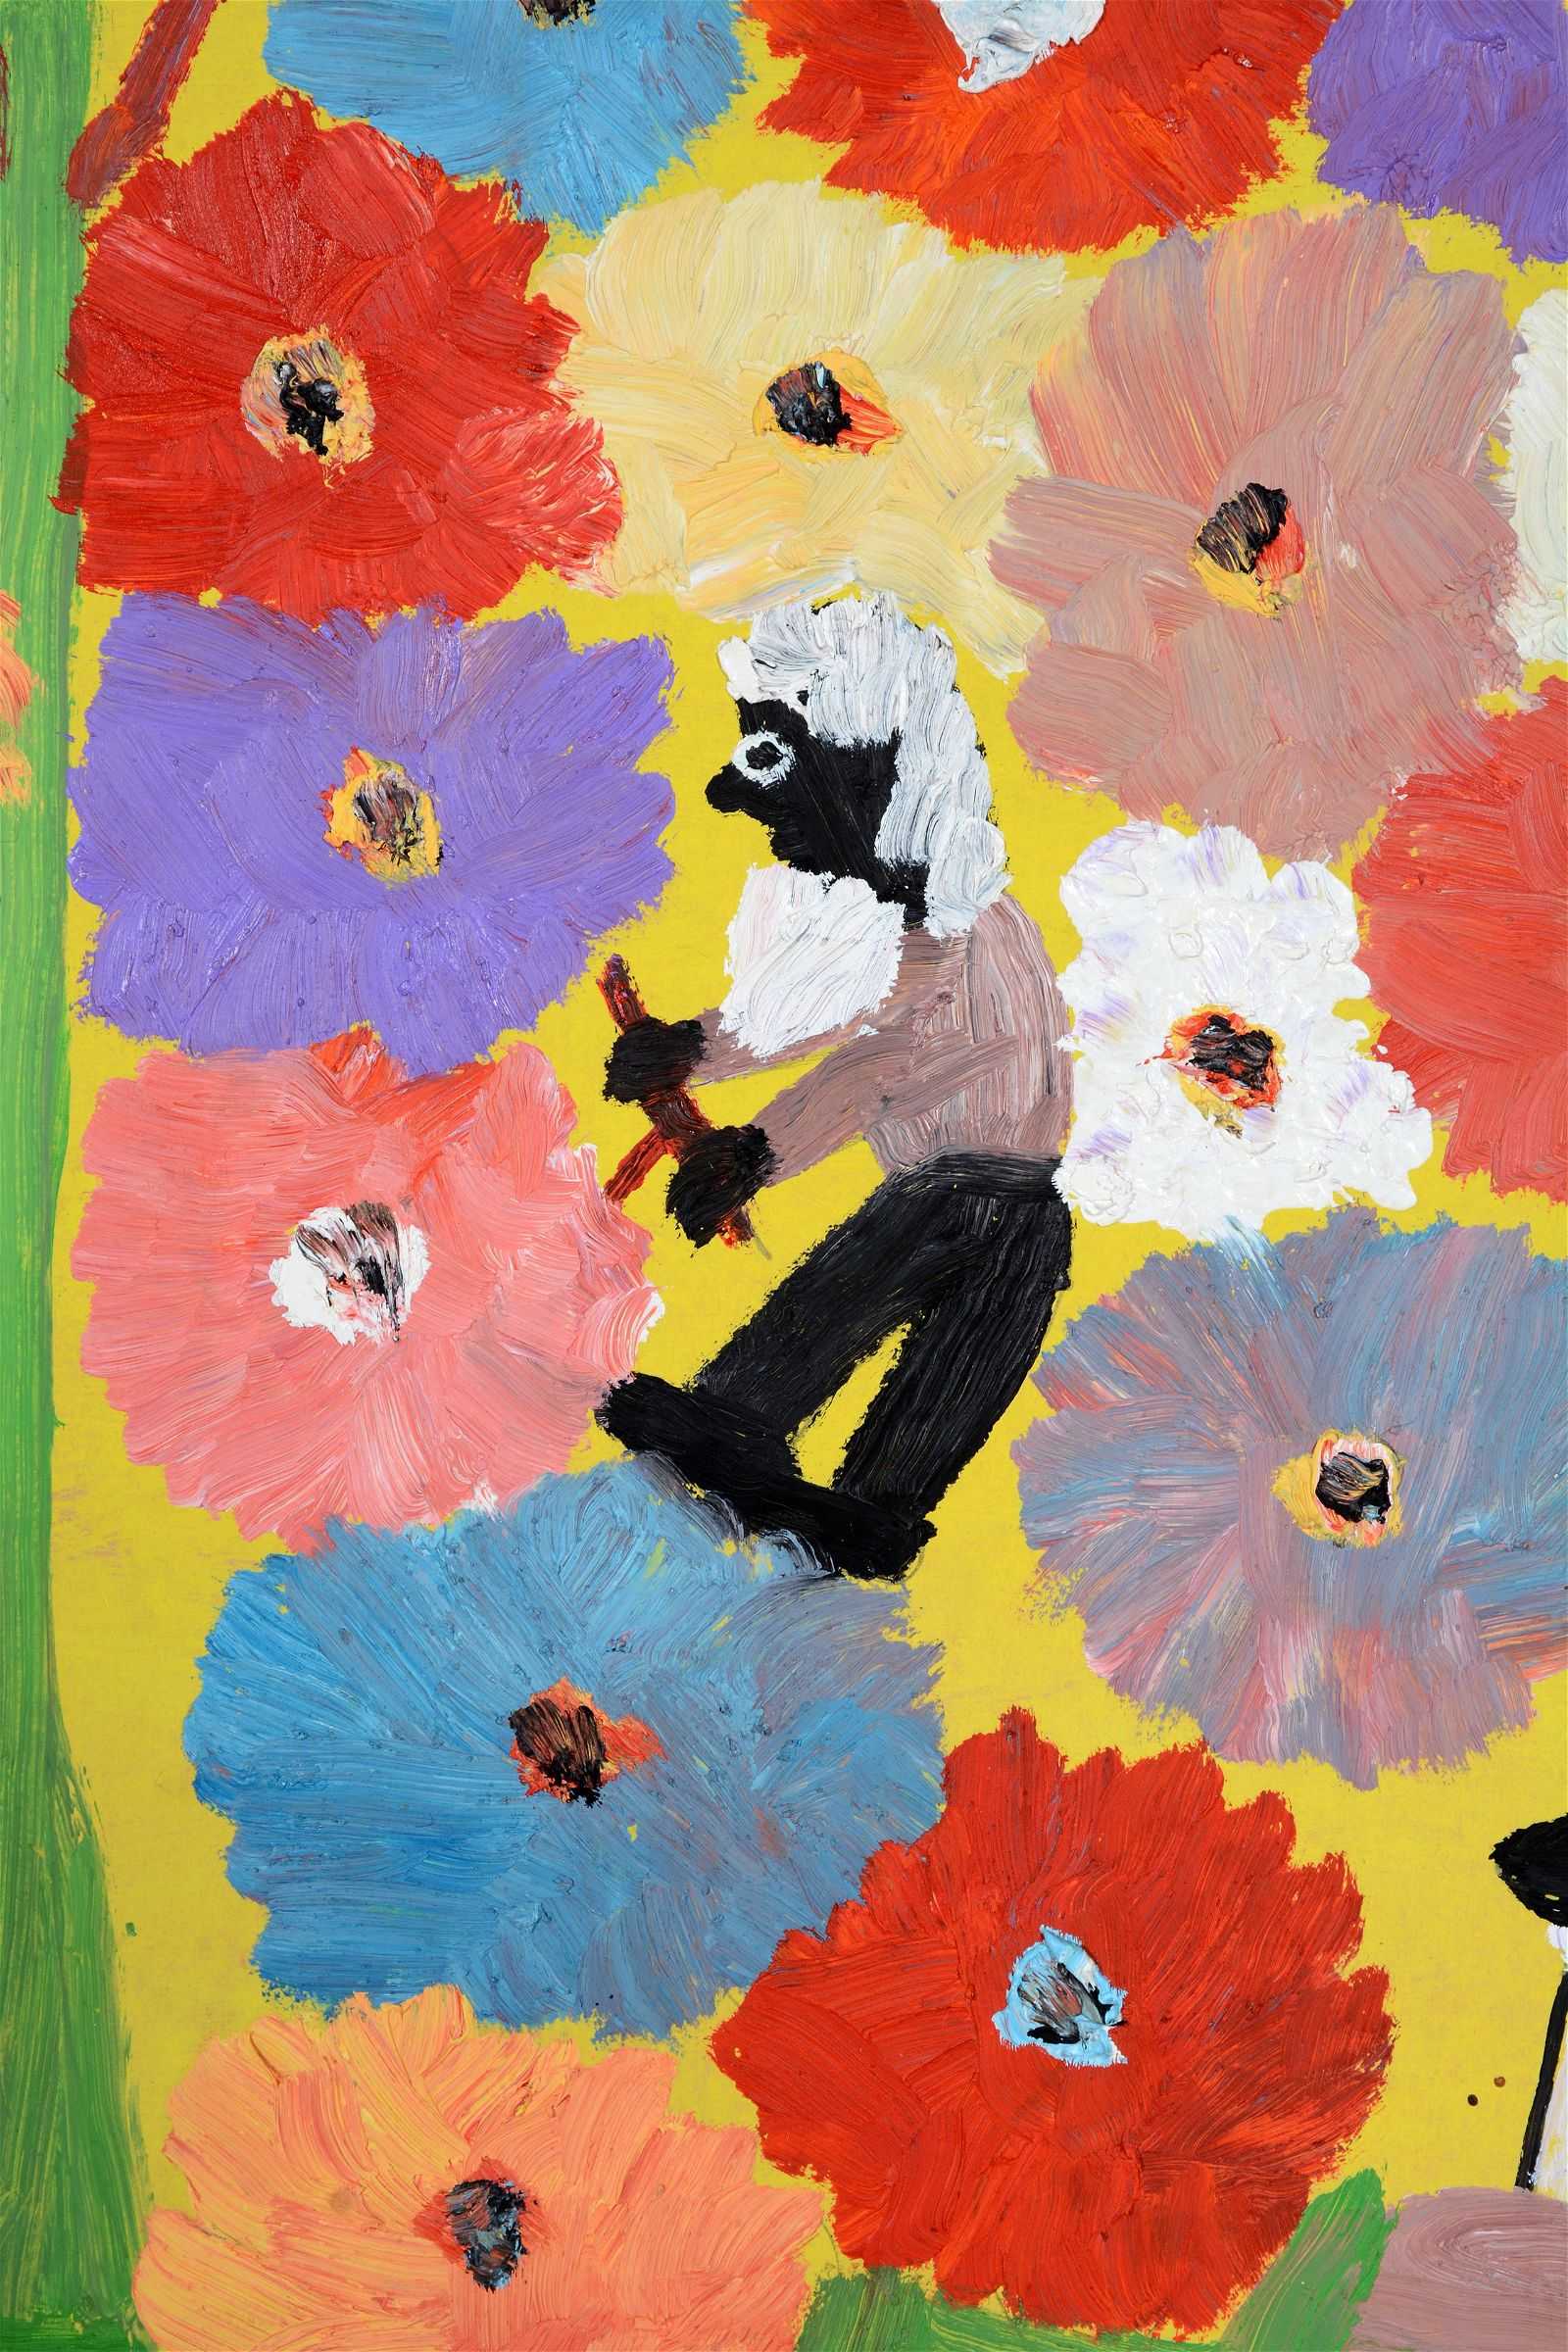 Detail shot of Clementine Hunter’s circa-1970s painting ‘Uncle Tom & Eliza in the Flower Garden’, which sold for $16,500 plus the buyer’s premium in April 2021. Image courtesy of Slotin Folk Art Auction and LiveAuctioneers.